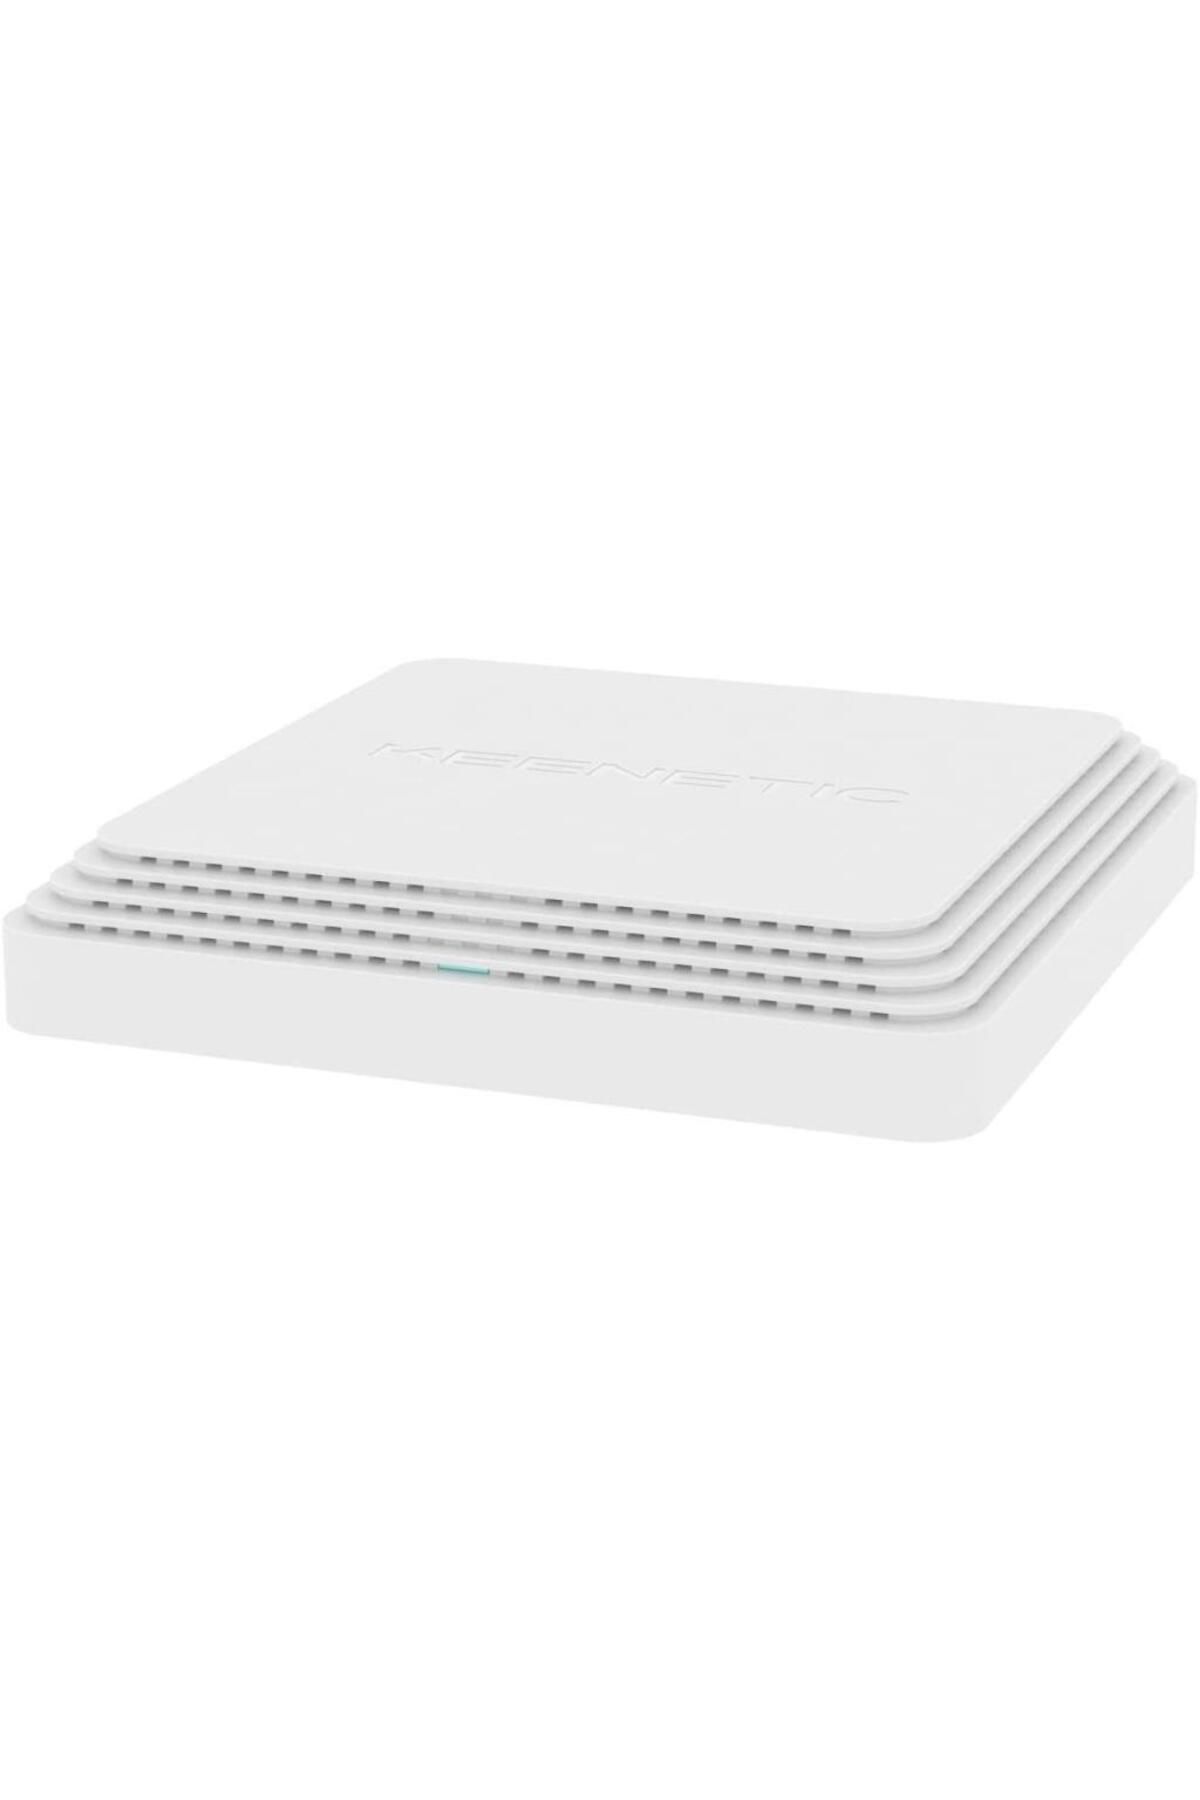 Keenetic Kn-3510-01en Voyager Pro Ax1800 Poe 6 Rou (ax1800 Mesh Wi-fi 6 Router/extender/access Point